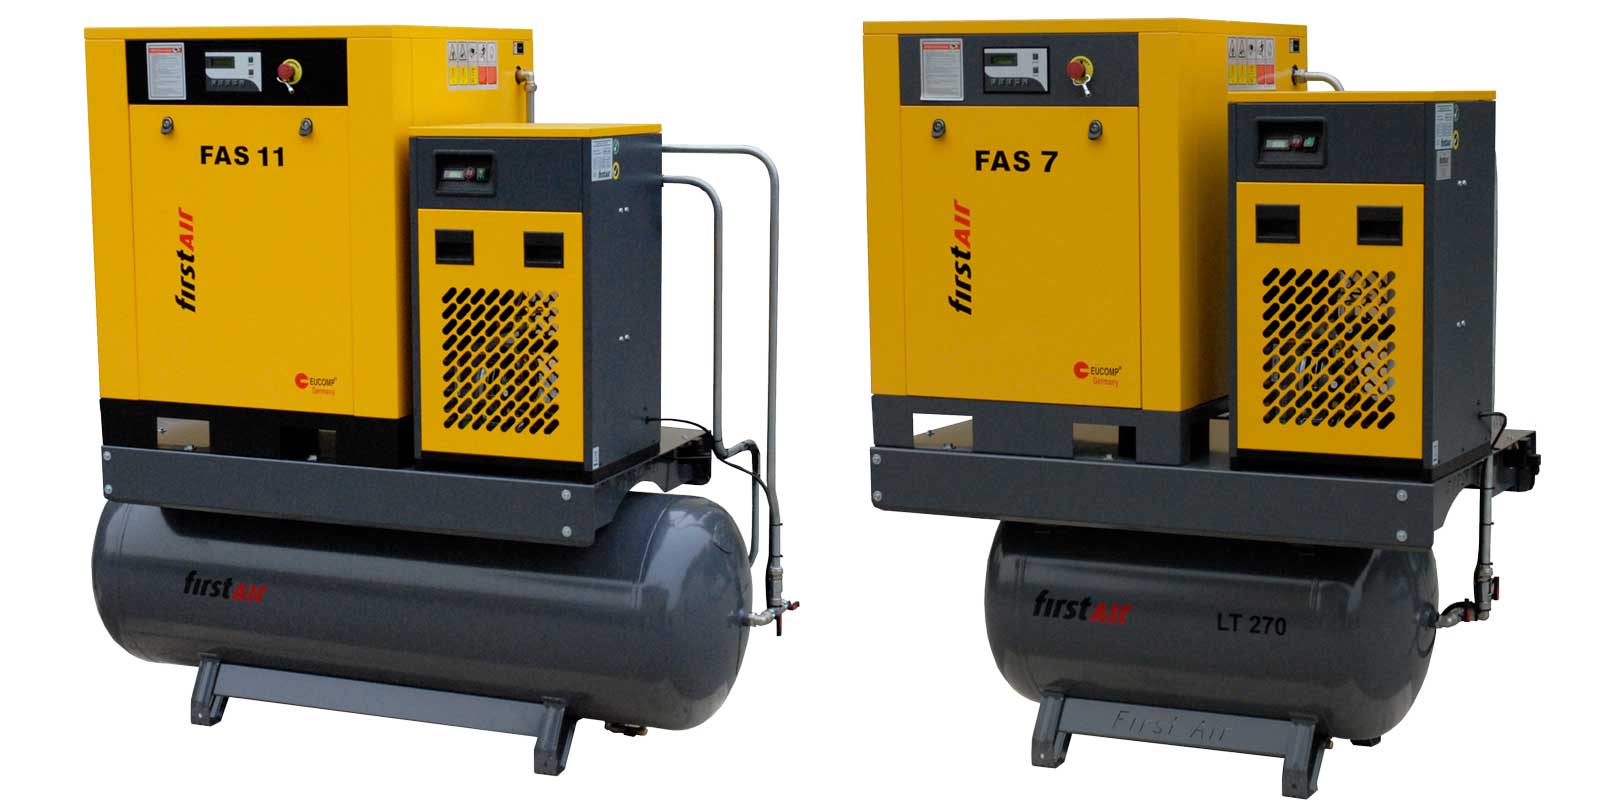 firstAir rotary screw air compressor models. Two different firstAir compressors shown with air receivers and air dryers.